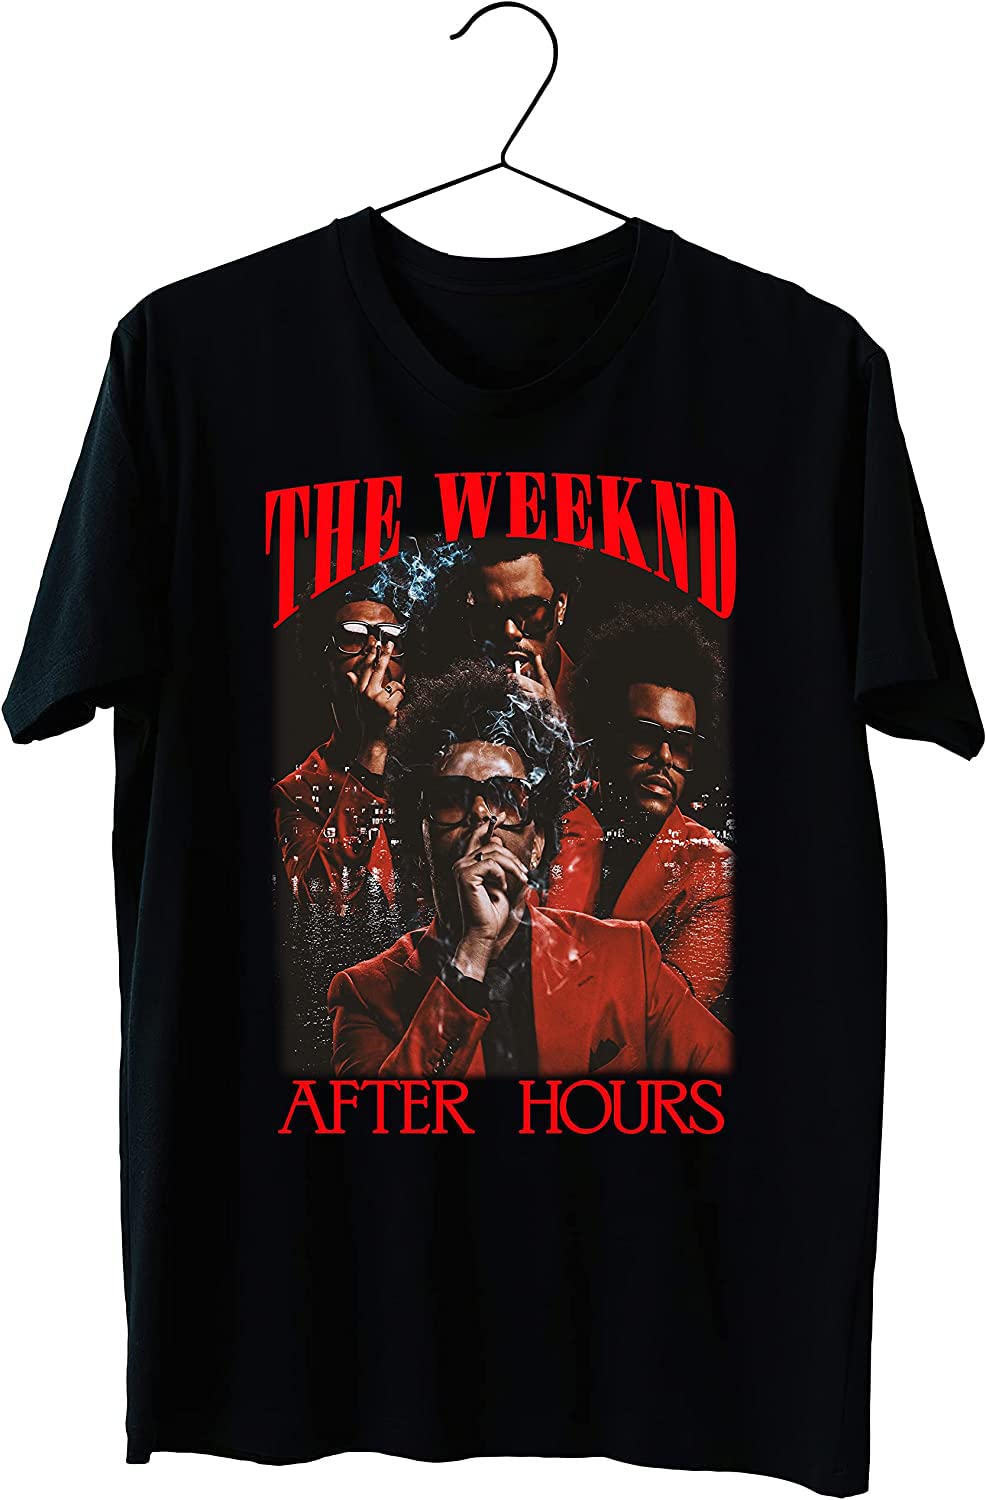 The Weeknd After Hours til Dawn Stadium Tour 2 Sided Shirt New Gift for Fan, The Weeknd Signature Music Concert Tour 2022 Tshirt for Men Women New Item